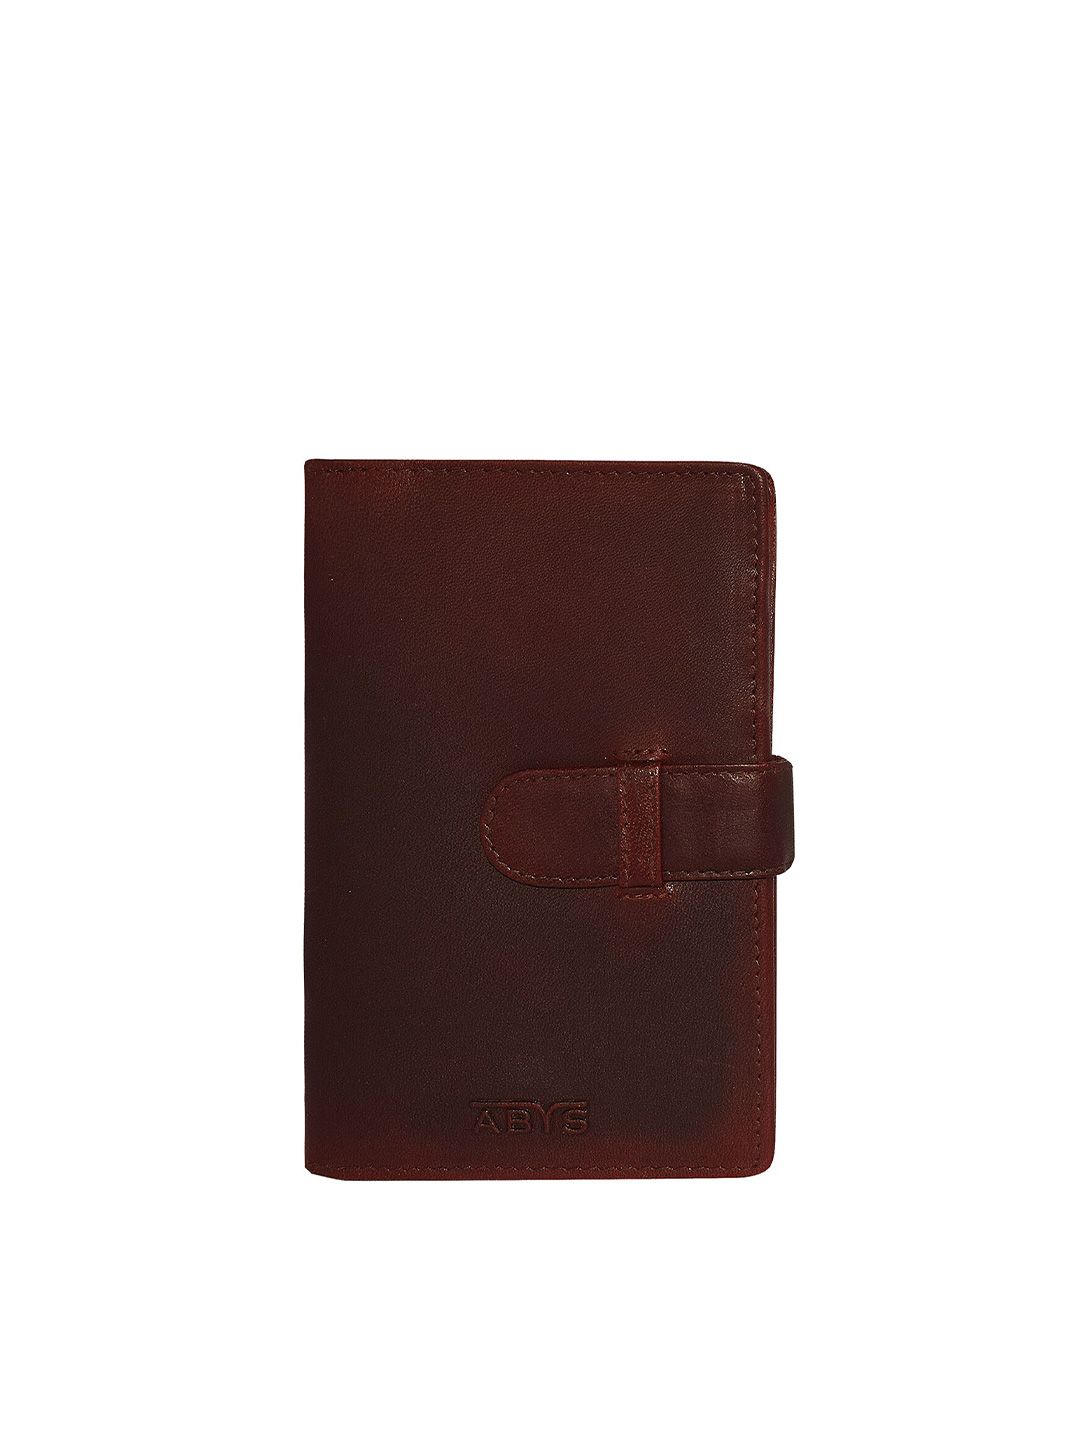 ABYS Unisex Brown Textured Leather Passport Holder Price in India